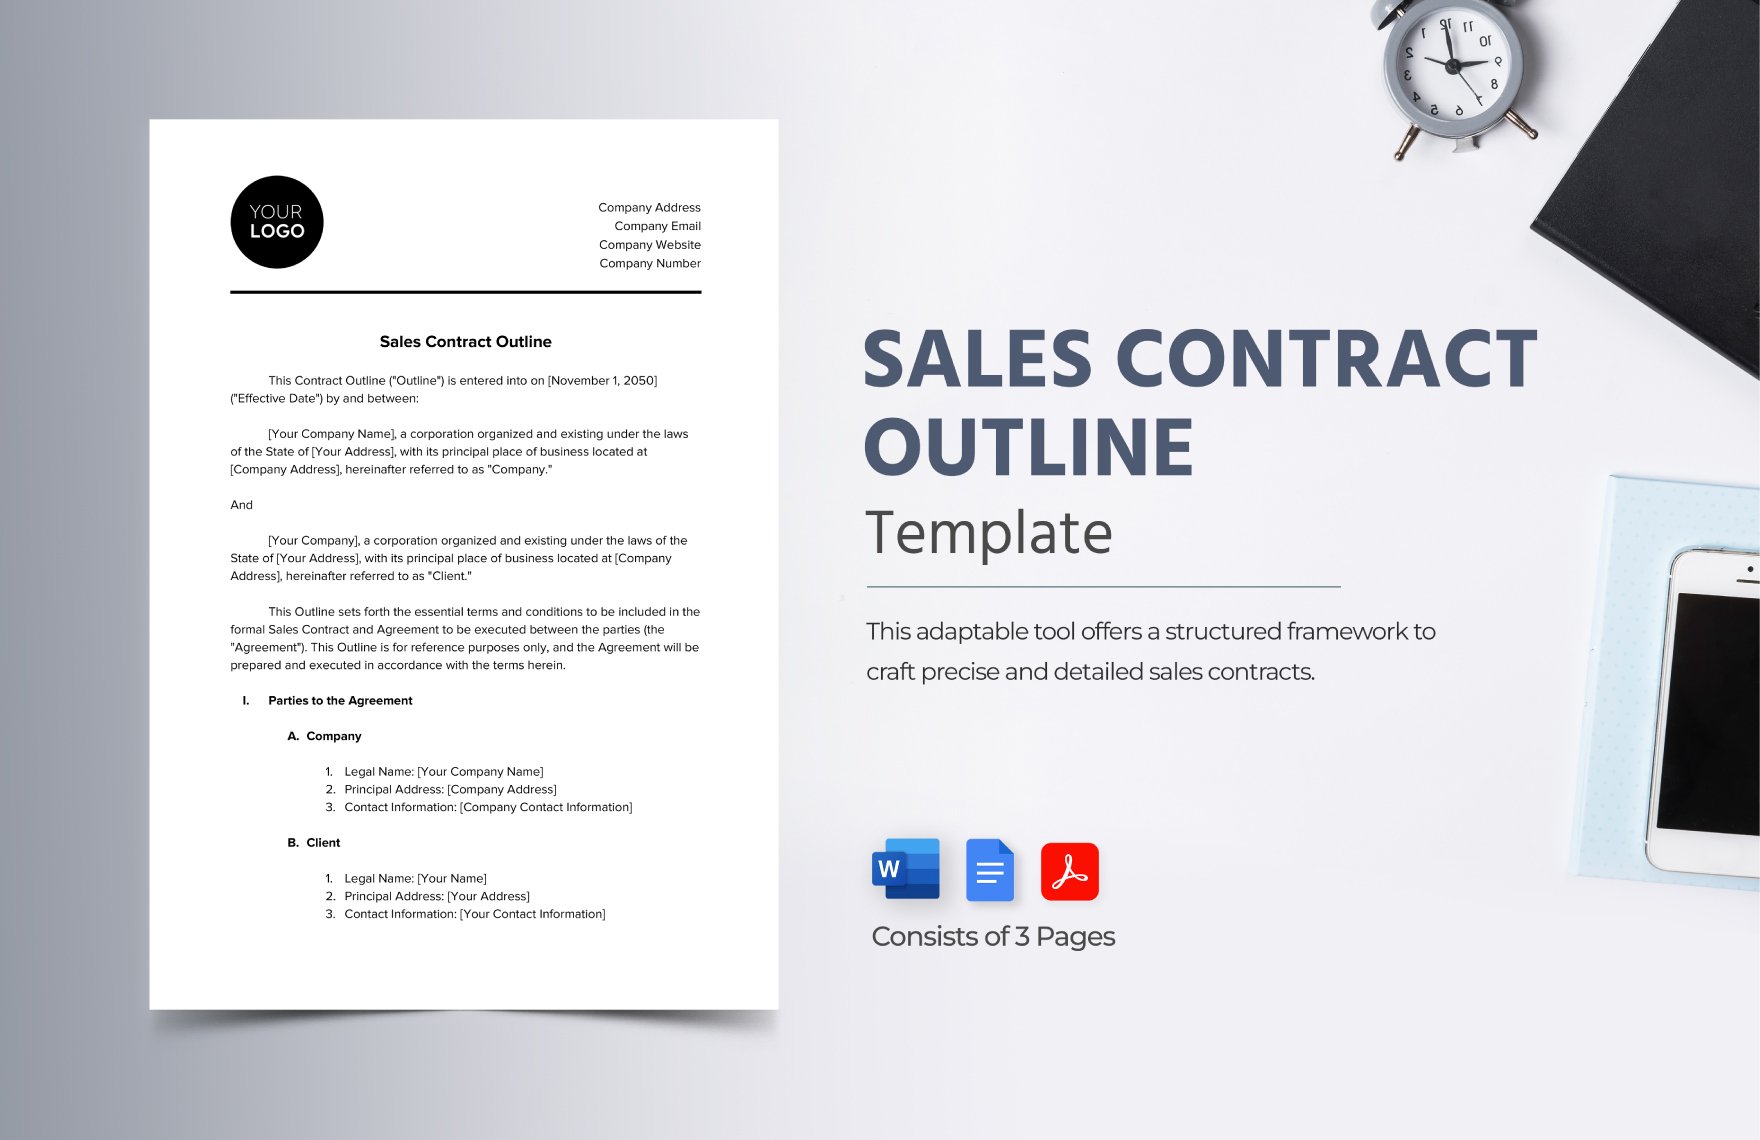 Sales Contract Outline Template in Word, Google Docs, PDF